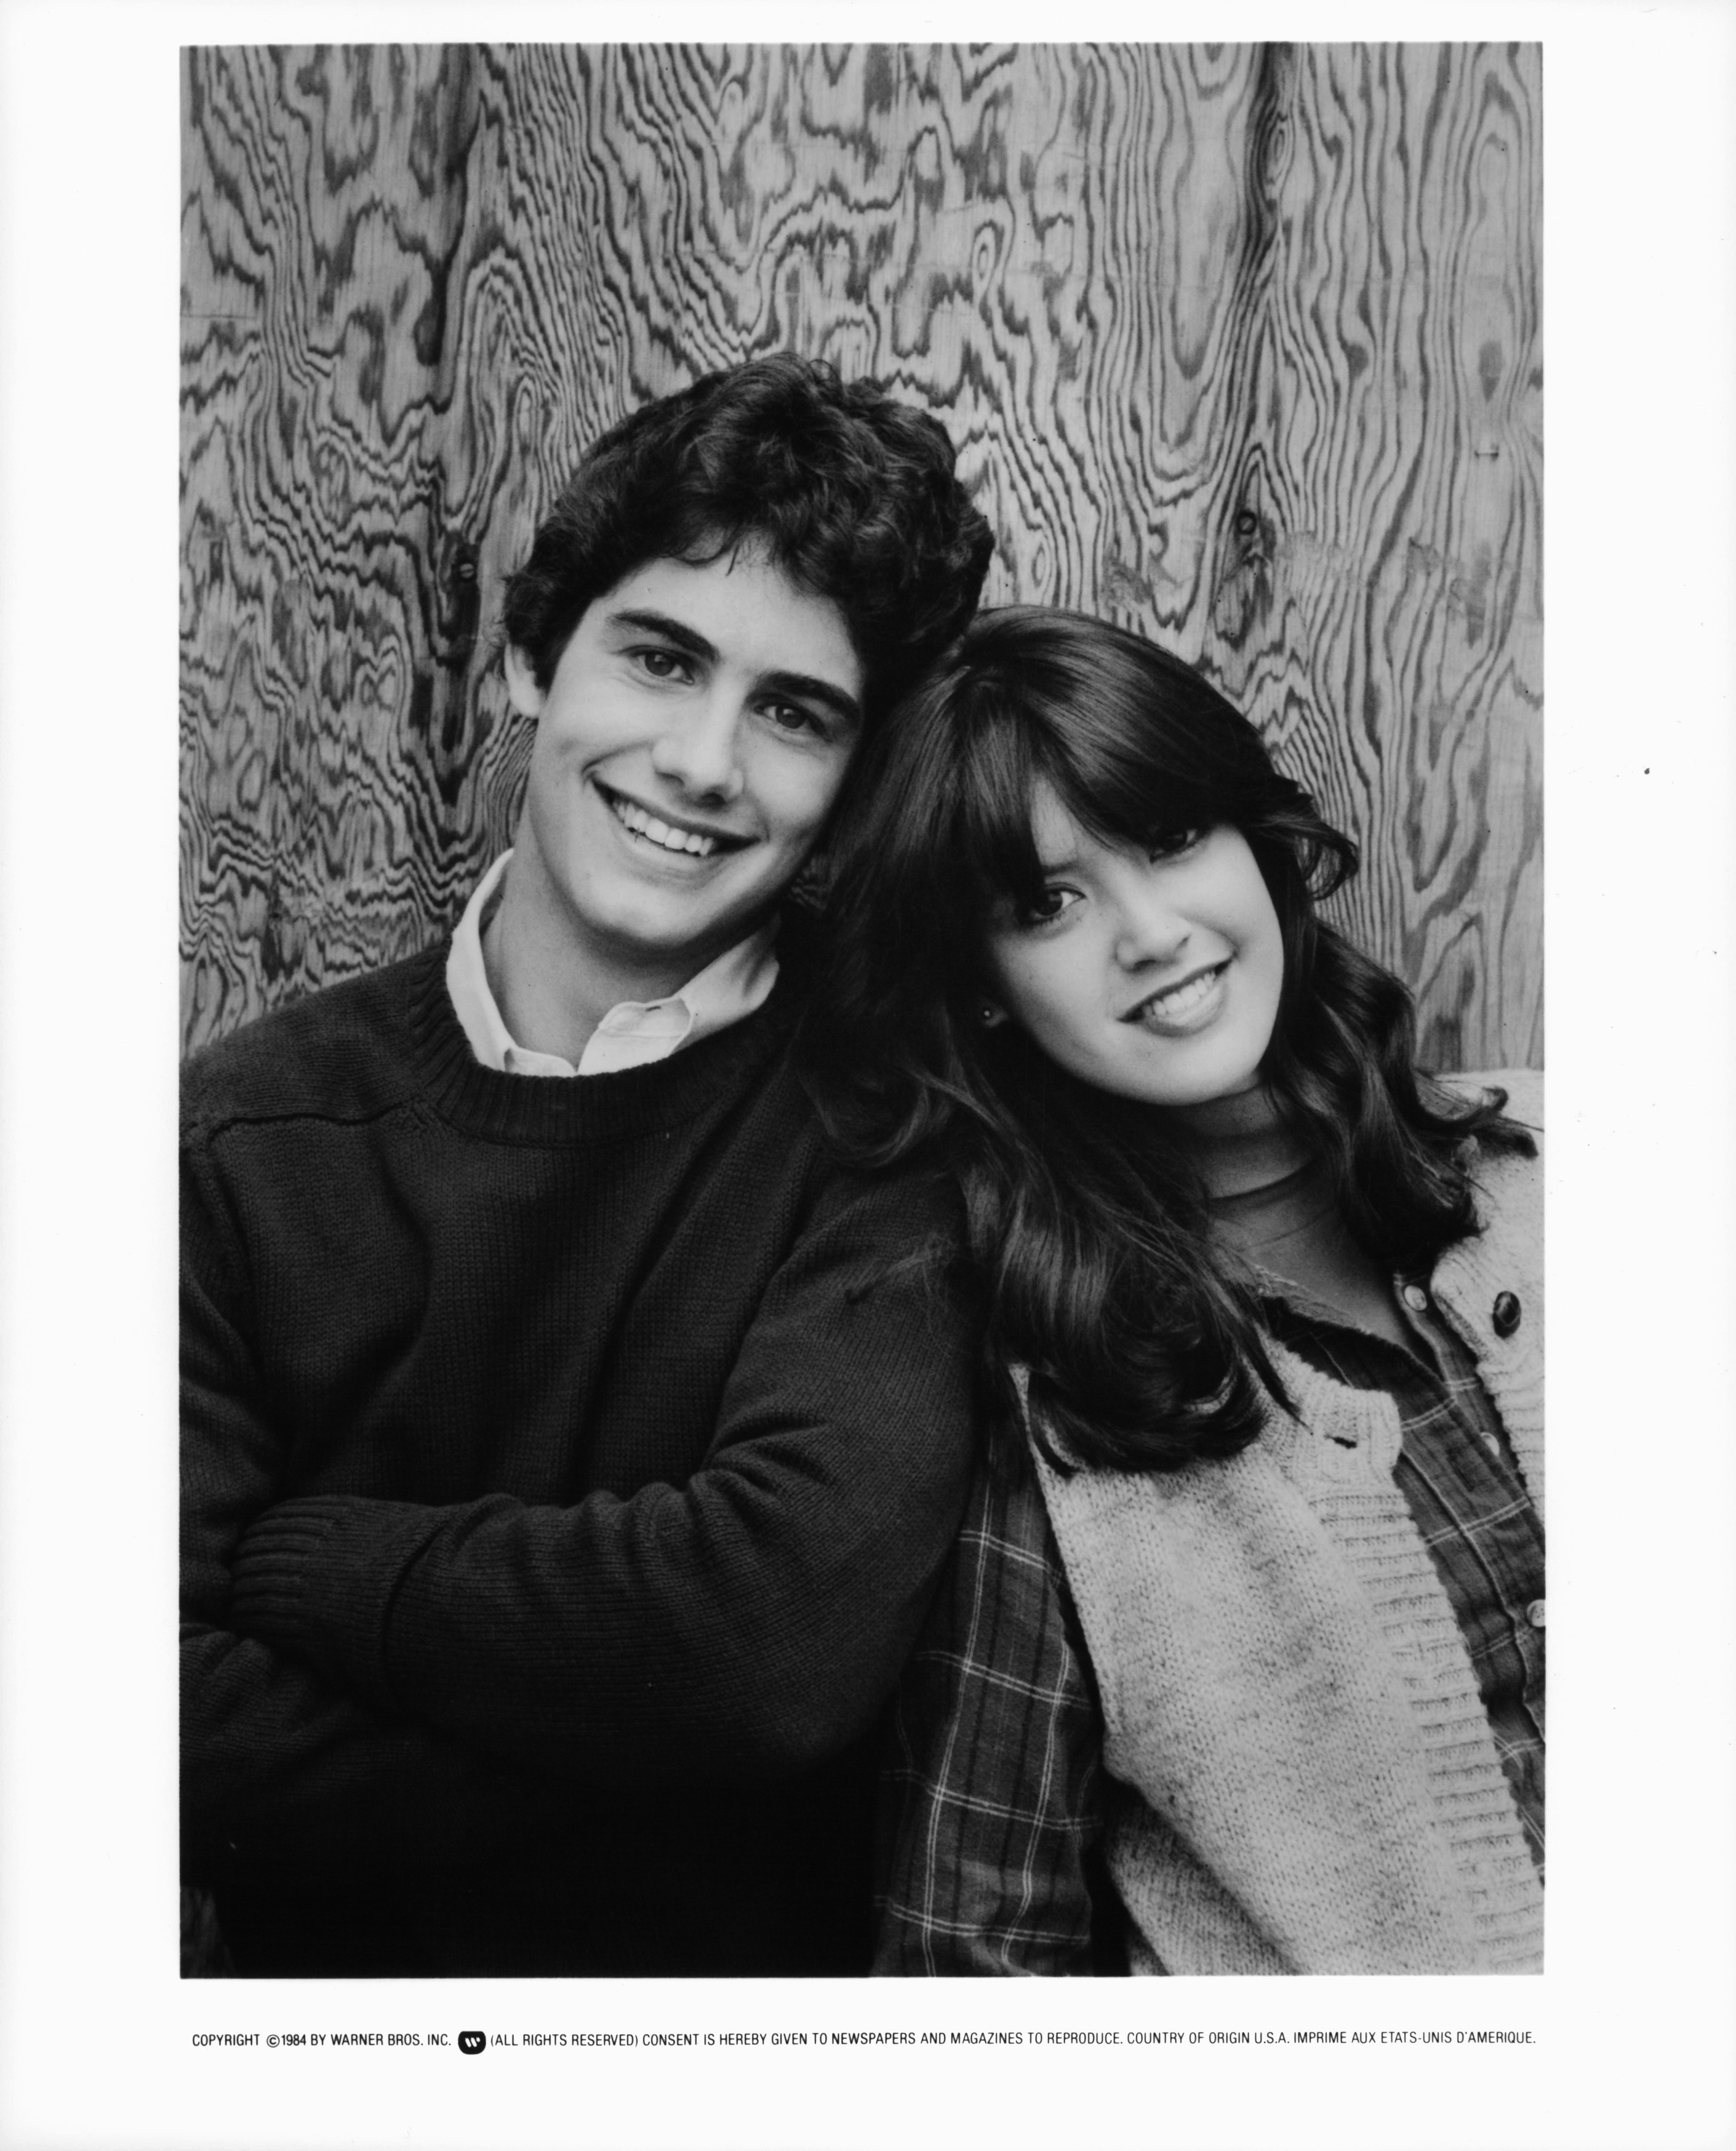 Zach Galligan and Phoebe Cates in a scene from the film "Gremlins" circa 1984 | Source: Getty Images